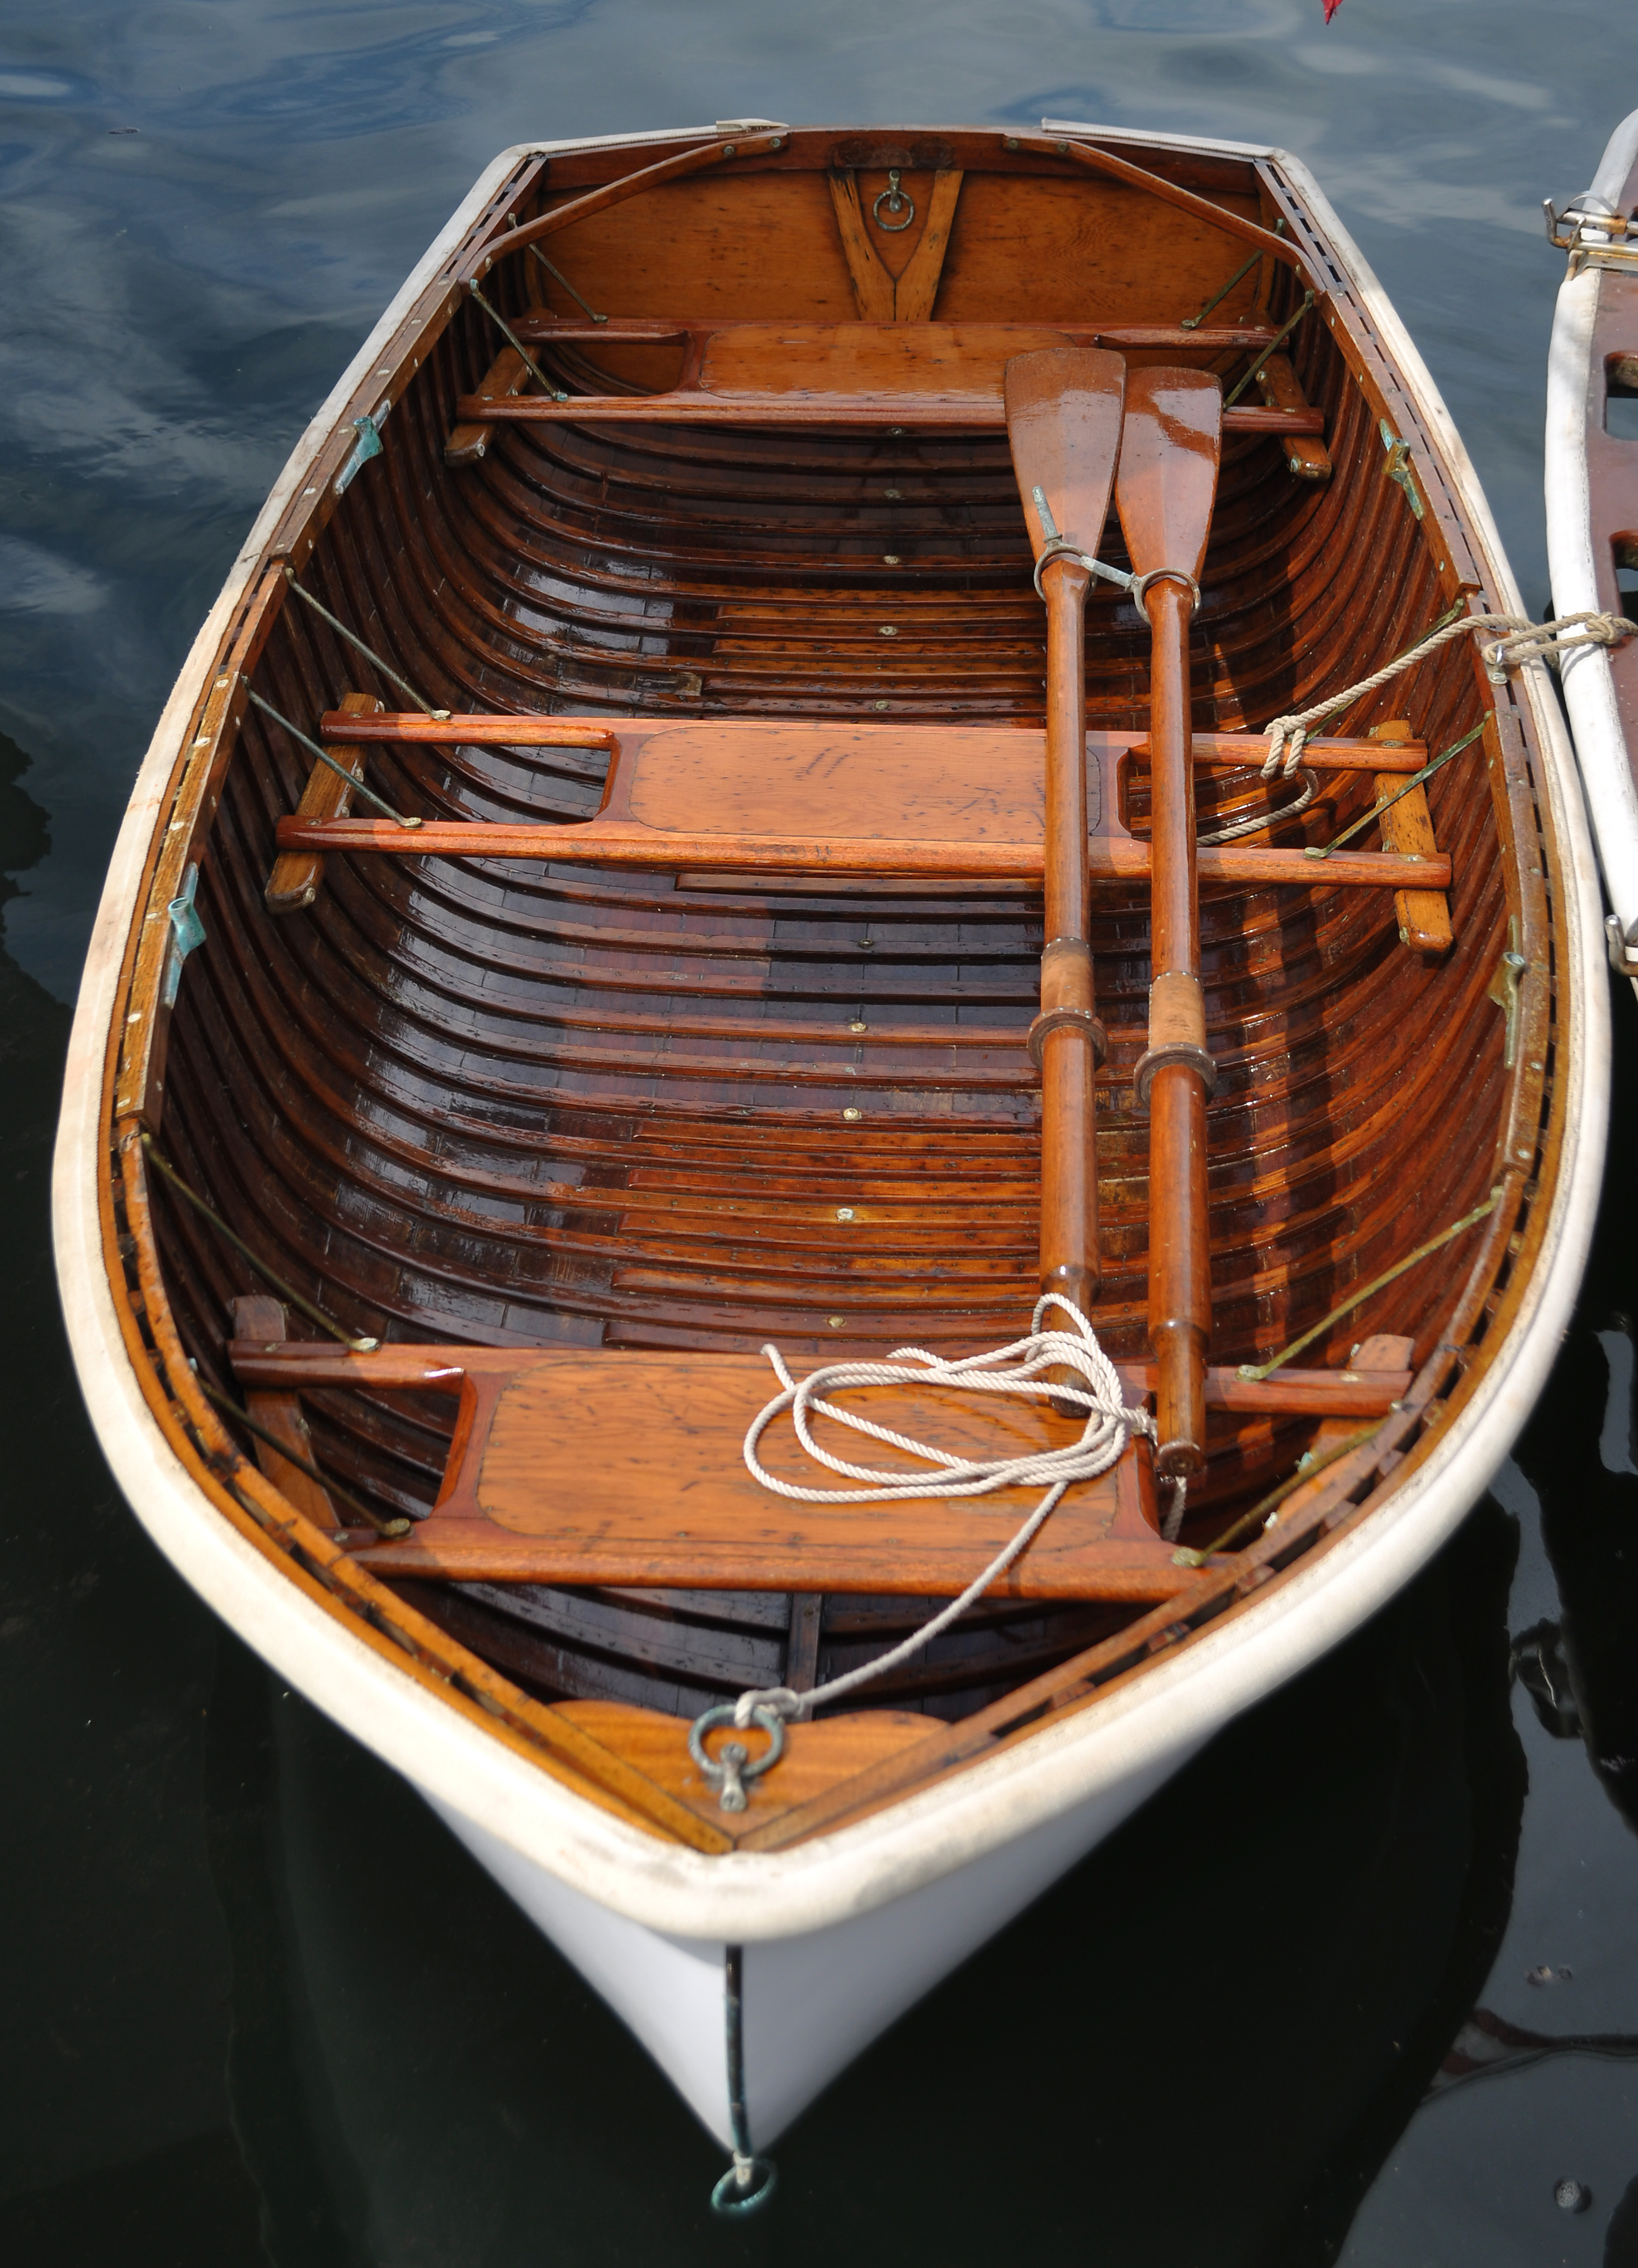 May 12, 2013 – Wooden Boats on the Water | Don &amp; Callie's ...